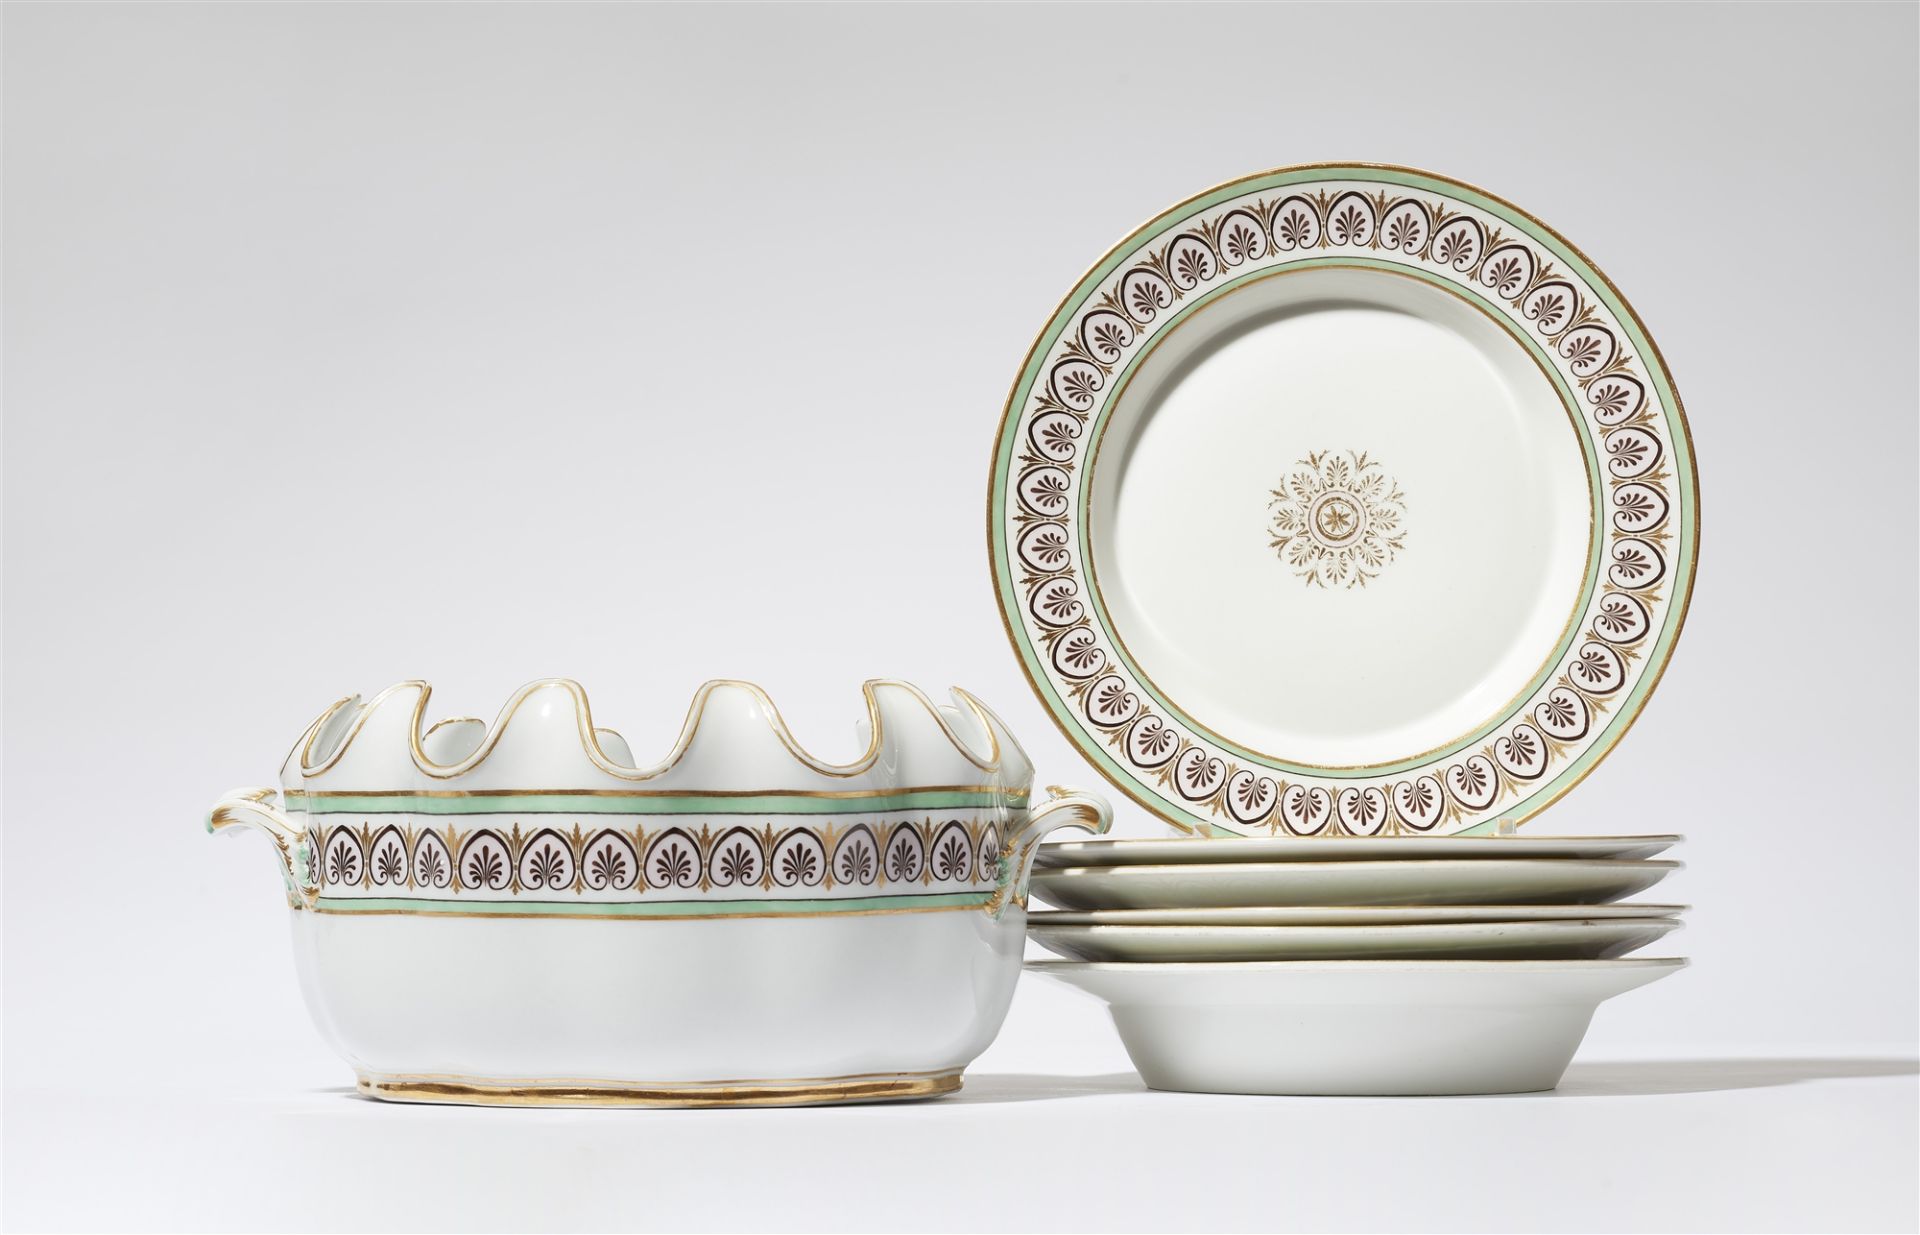 Seven Berlin KPM porcelain items from a Neoclassical service